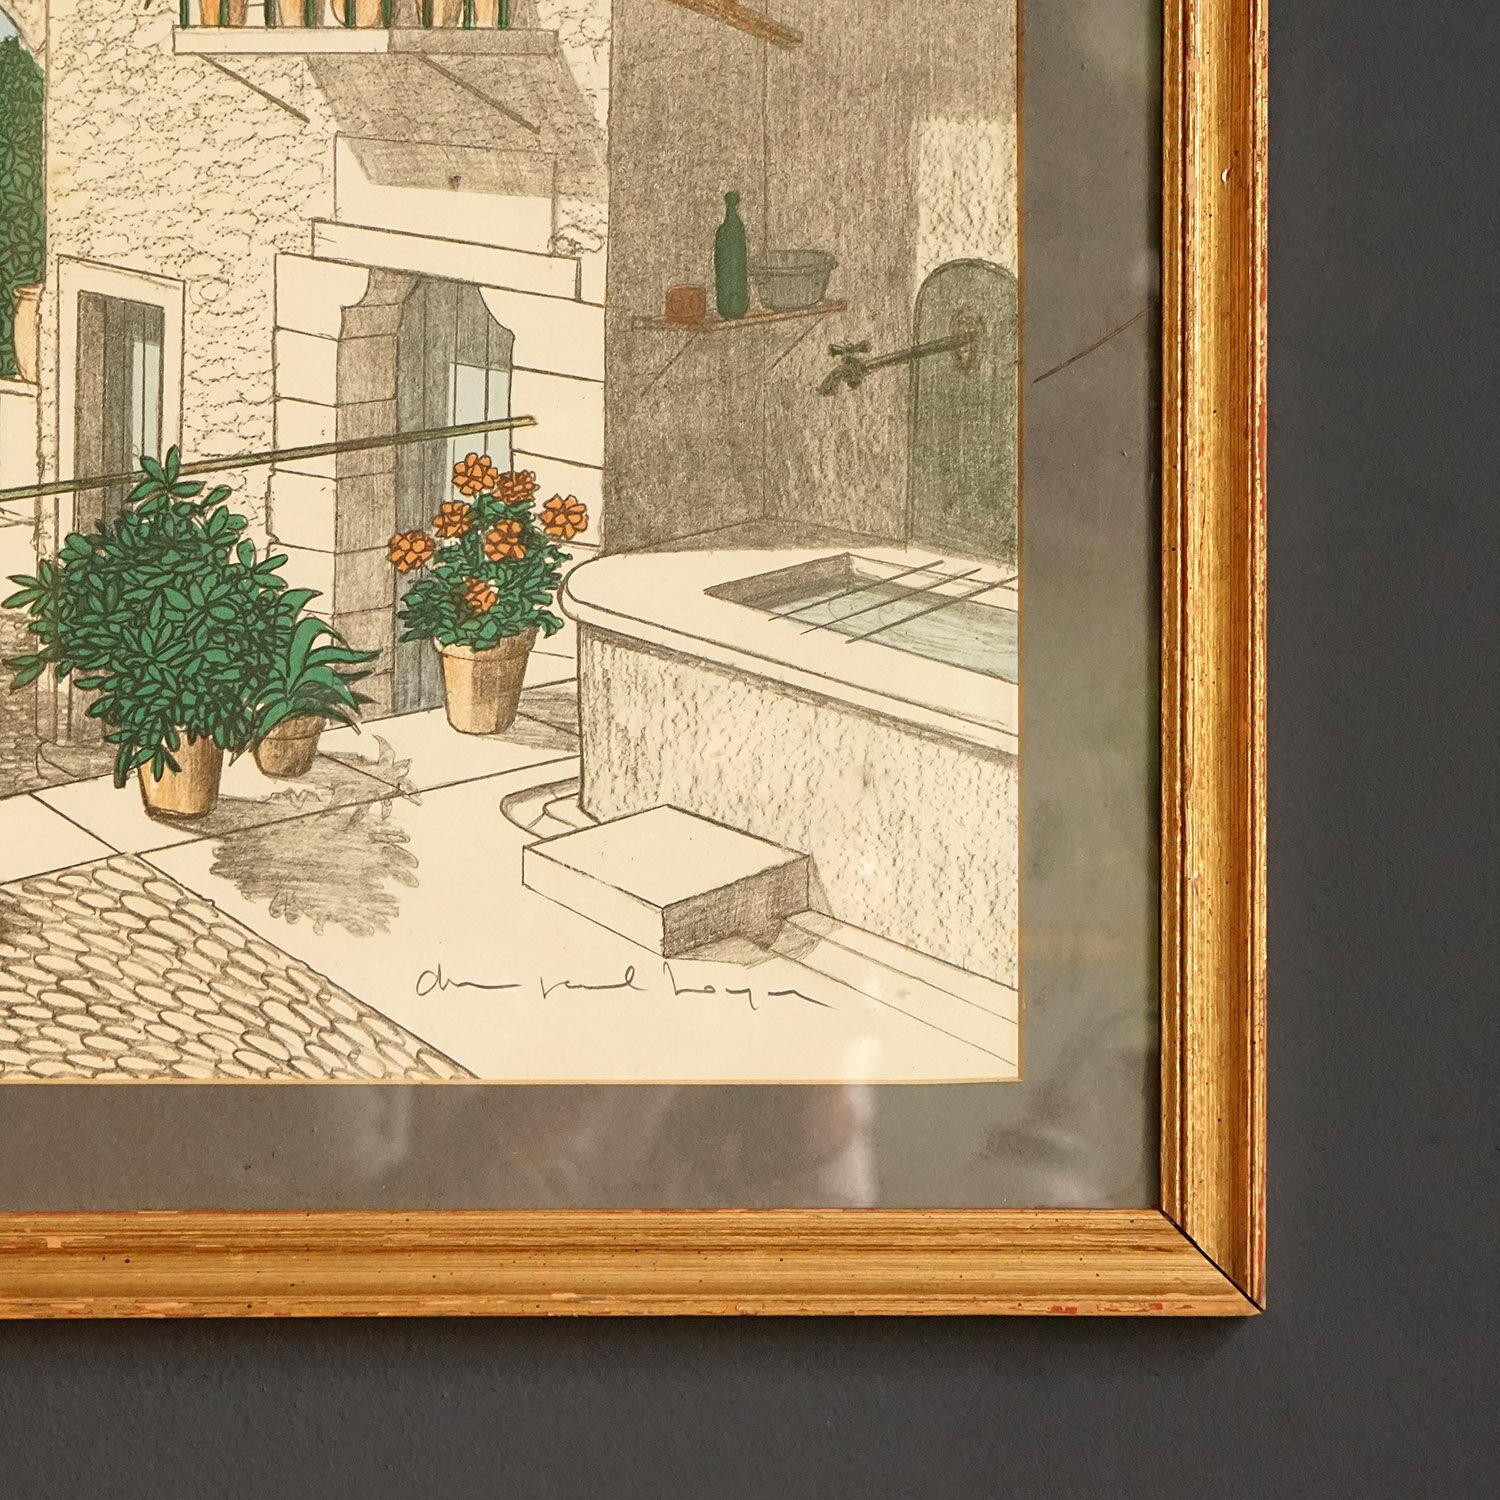 20th Century Mediterranean Village Scene By Denis Paul Noyer, Vintage Signed Lithograph 1970s For Sale